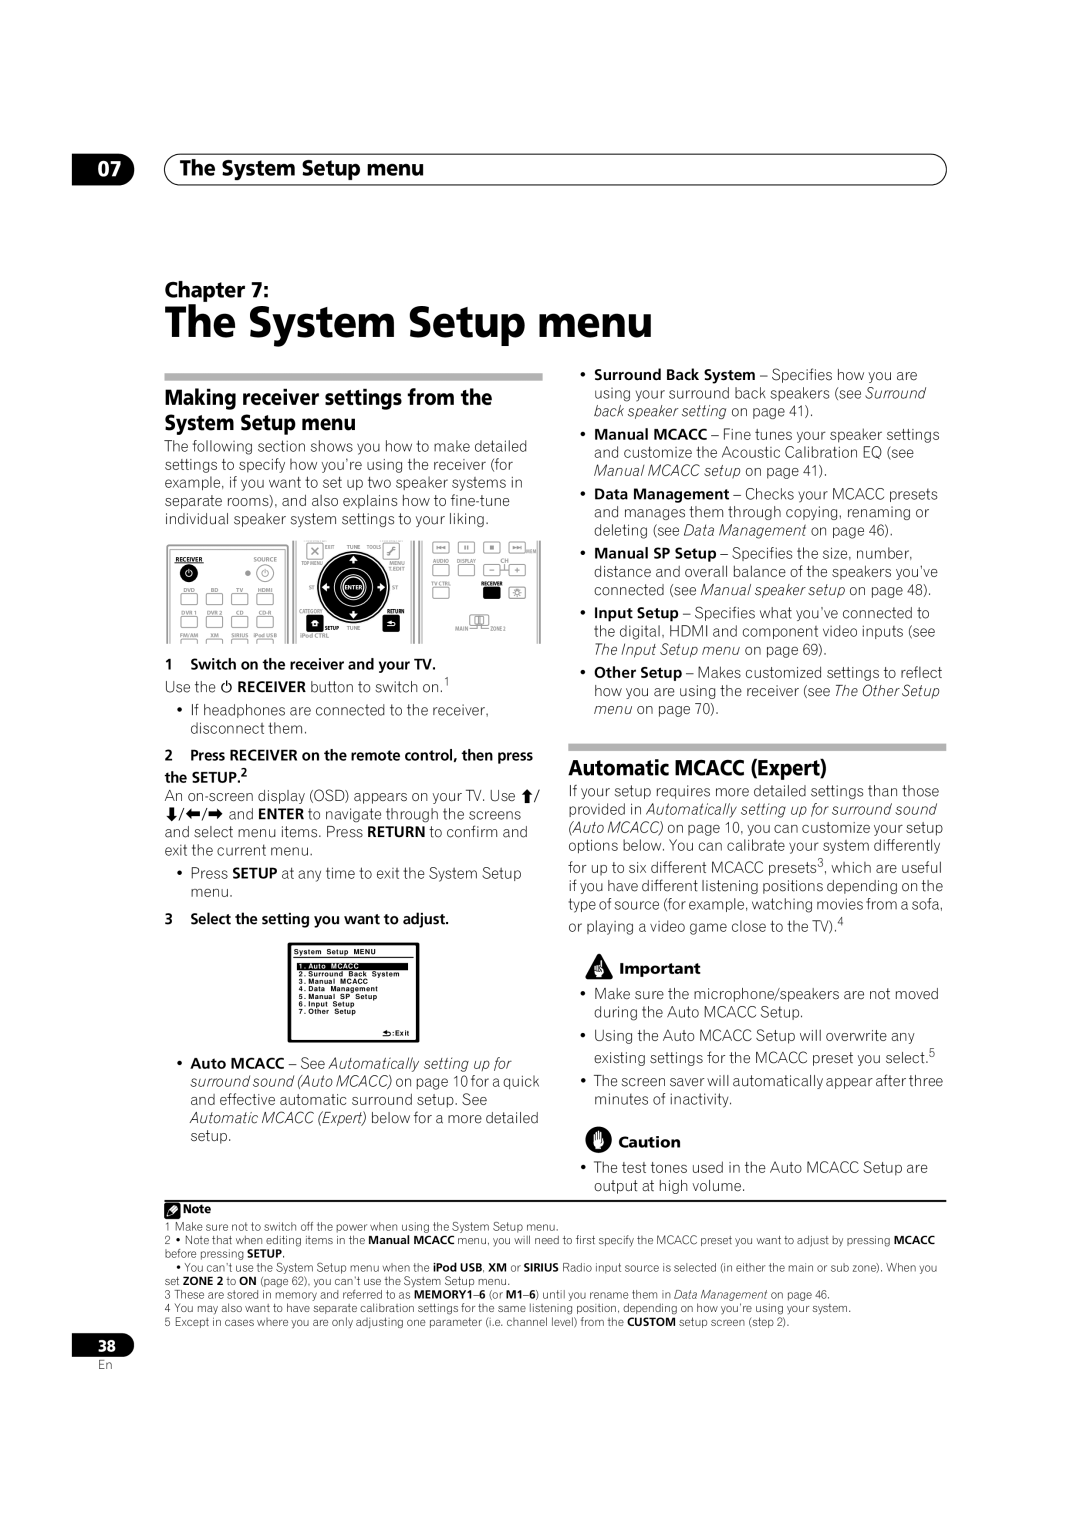 Pioneer VSX-01TXH manual 07The System Setup menu Chapter, Automatic MCACC Expert 